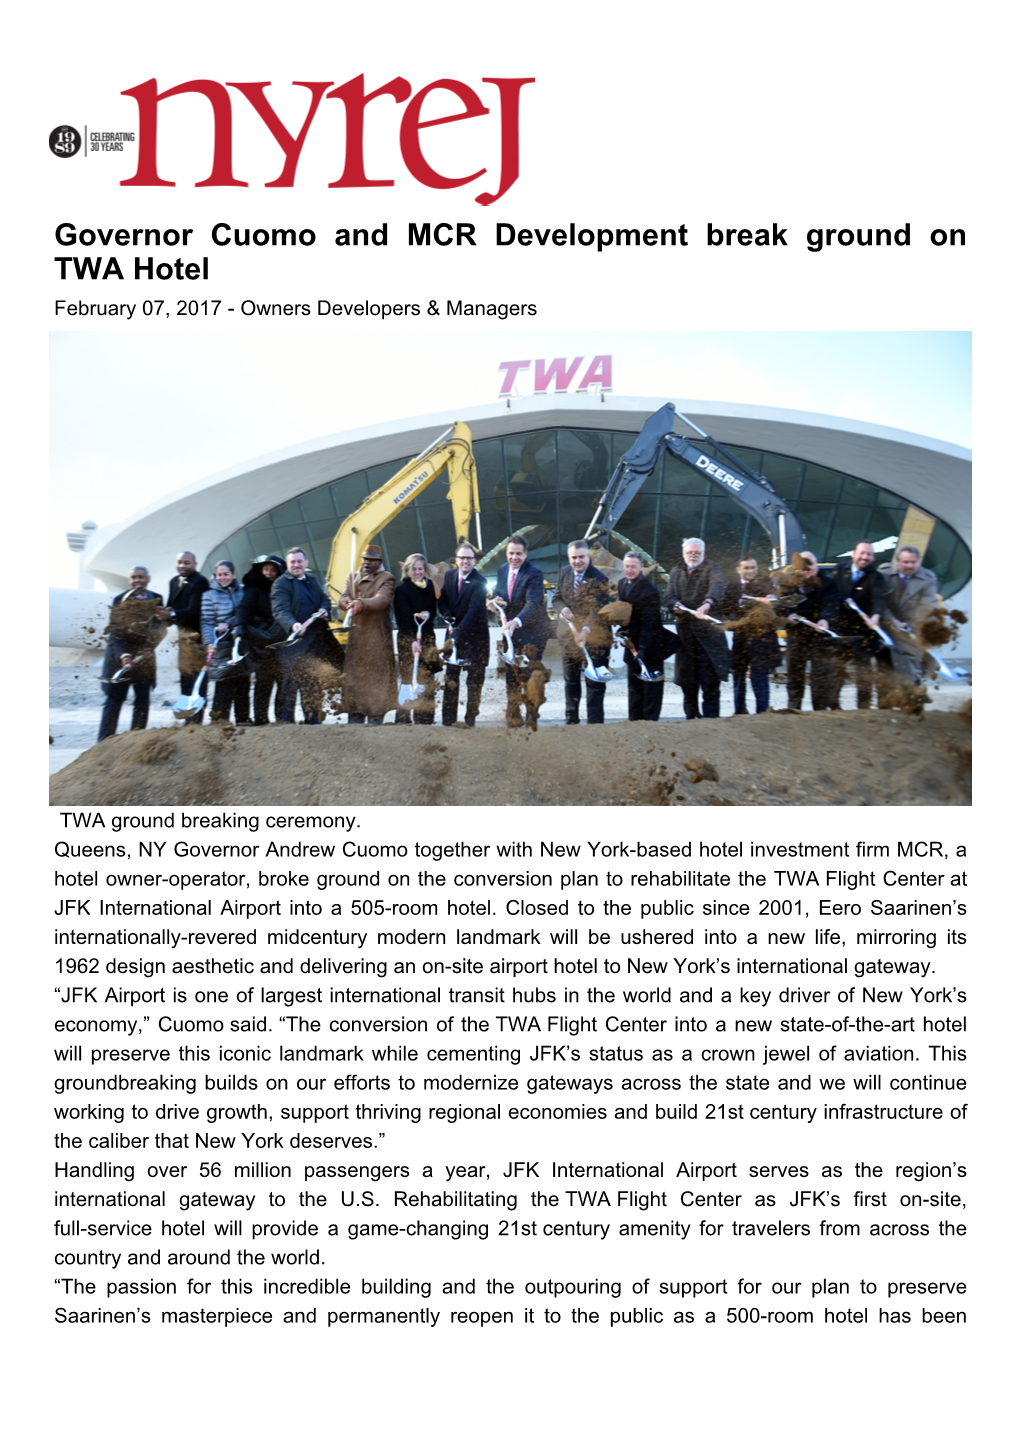 Governor Cuomo and MCR Development Break Ground on TWA Hotel February 07, 2017 - Owners Developers & Managers